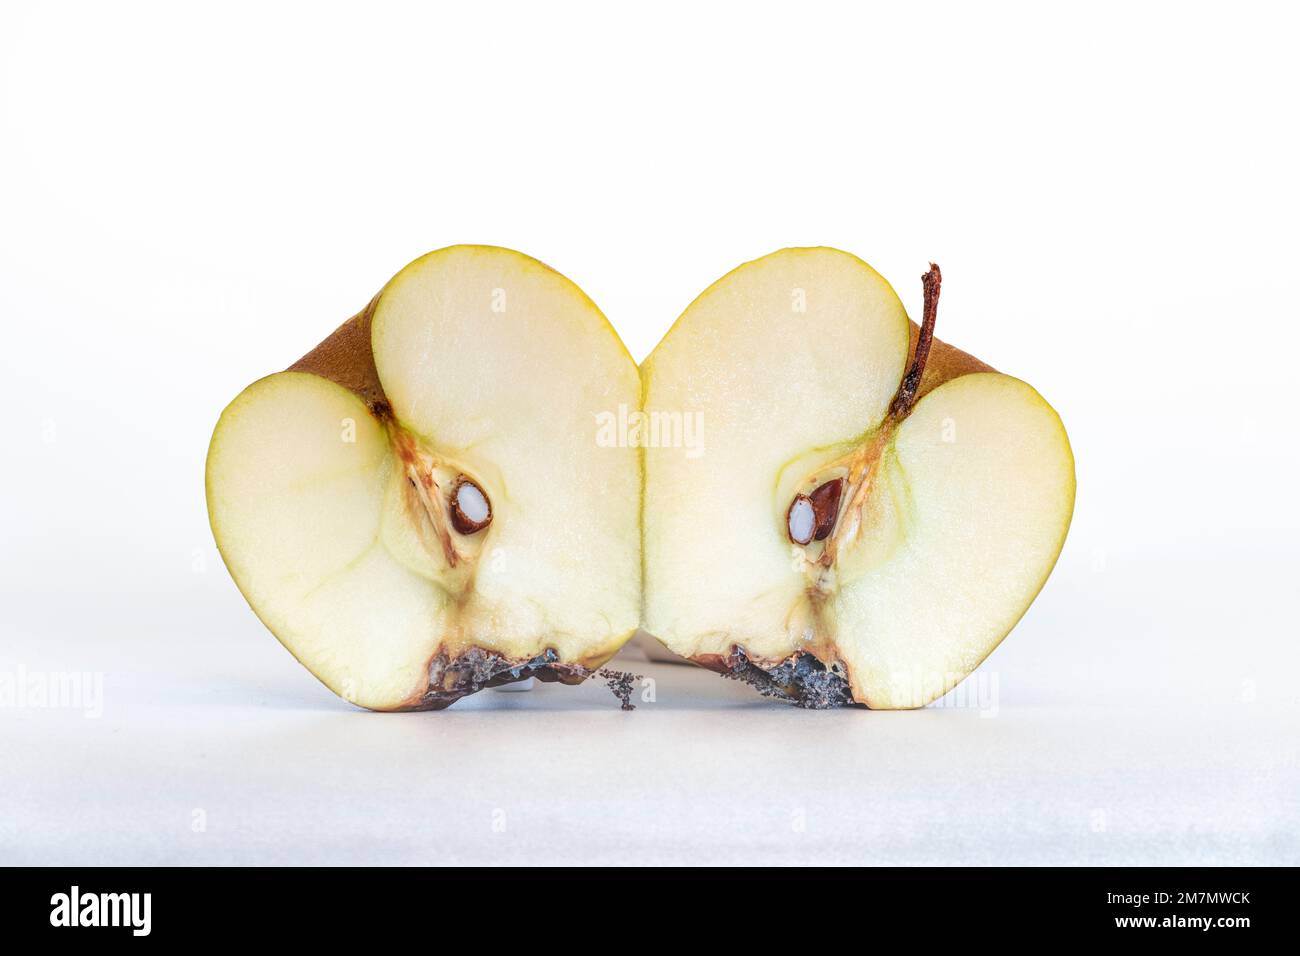 Spoiled, dehydrated and rotten apple, one apple cut in half, two apple halves, isolated on white background Stock Photo